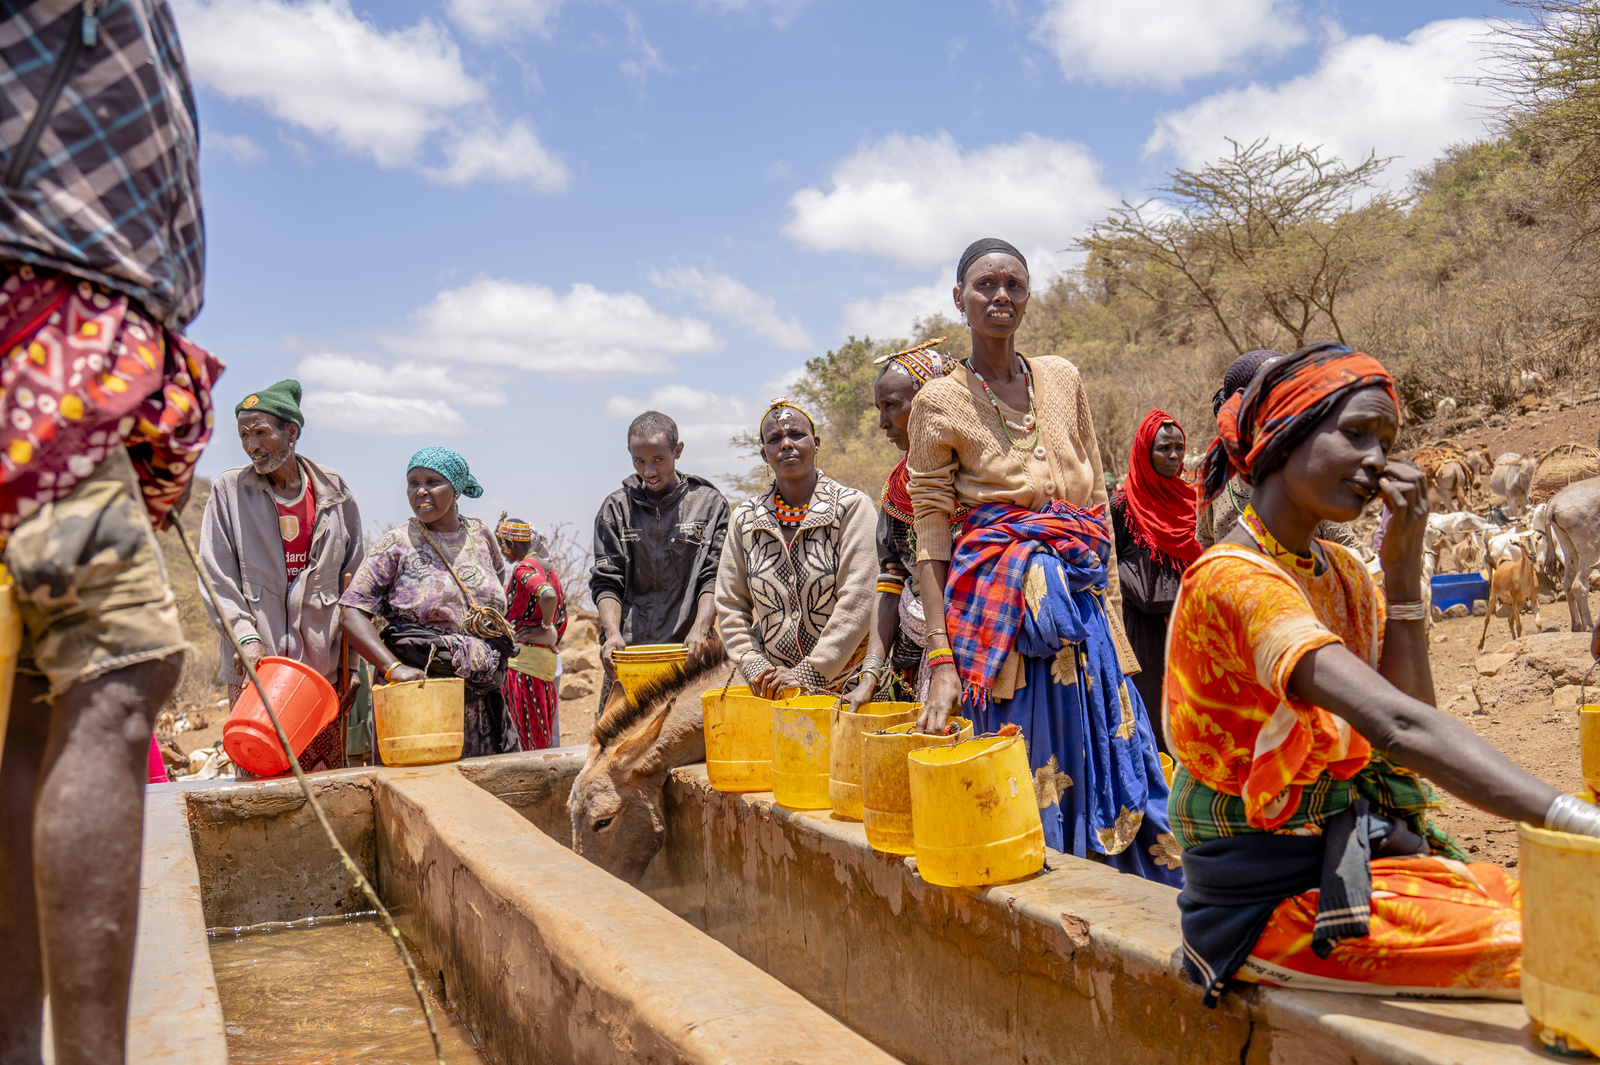 People wait in the midday sun for the water troughs to fill with water at Hula Hula Springs in Marsabit County, Kenya. With the ongoing drought in Marsabit, the spring is the only available water source for the whole community. 